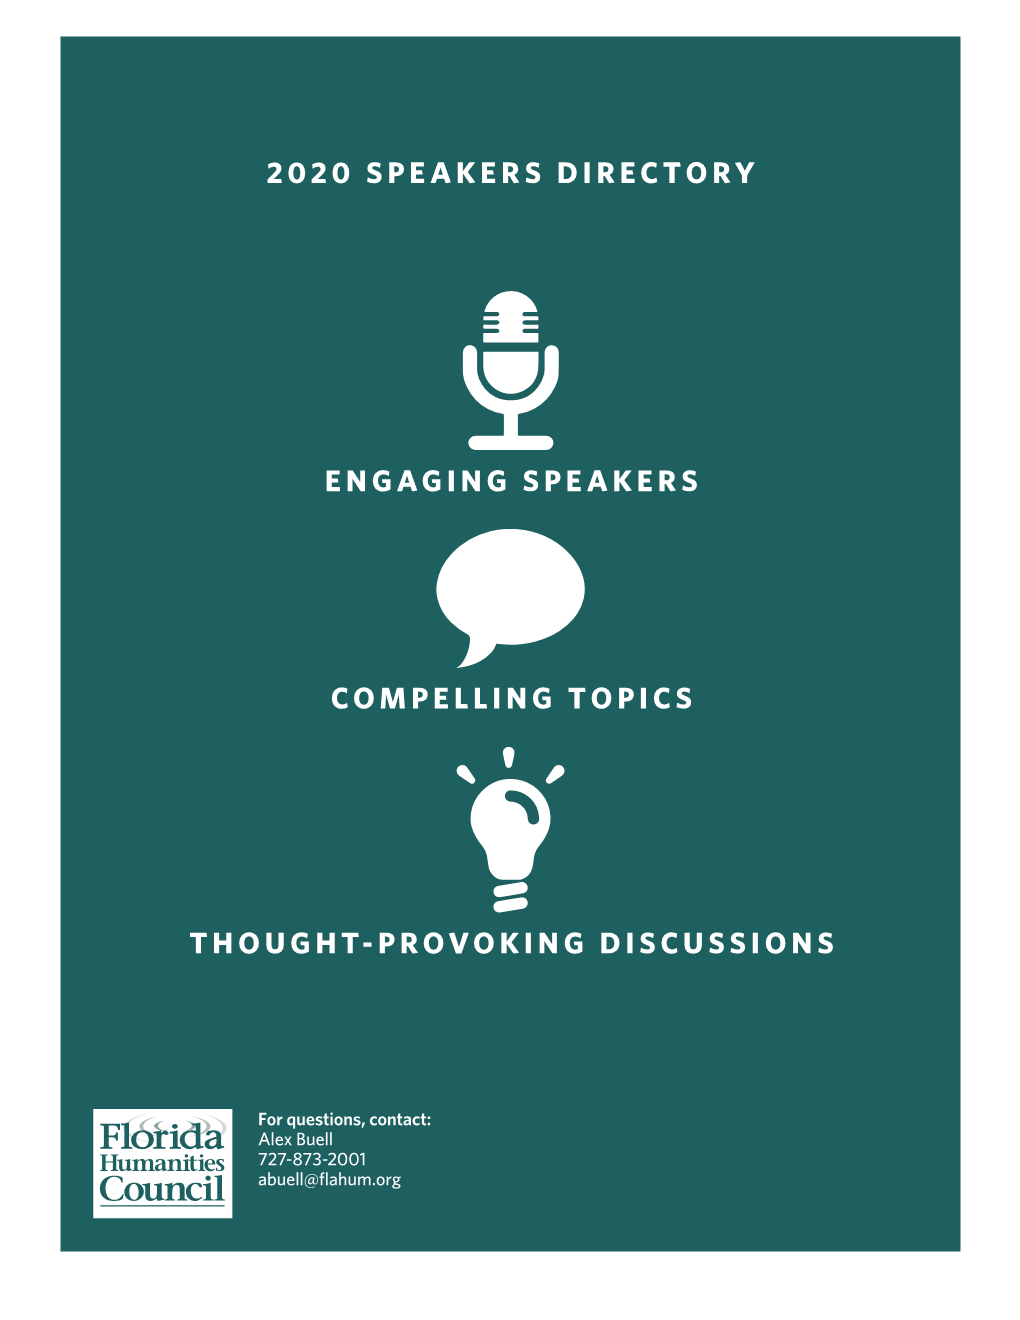 2020 Speakers Directory Engaging Speakers Compelling Topics Thought-Provoking Discussions